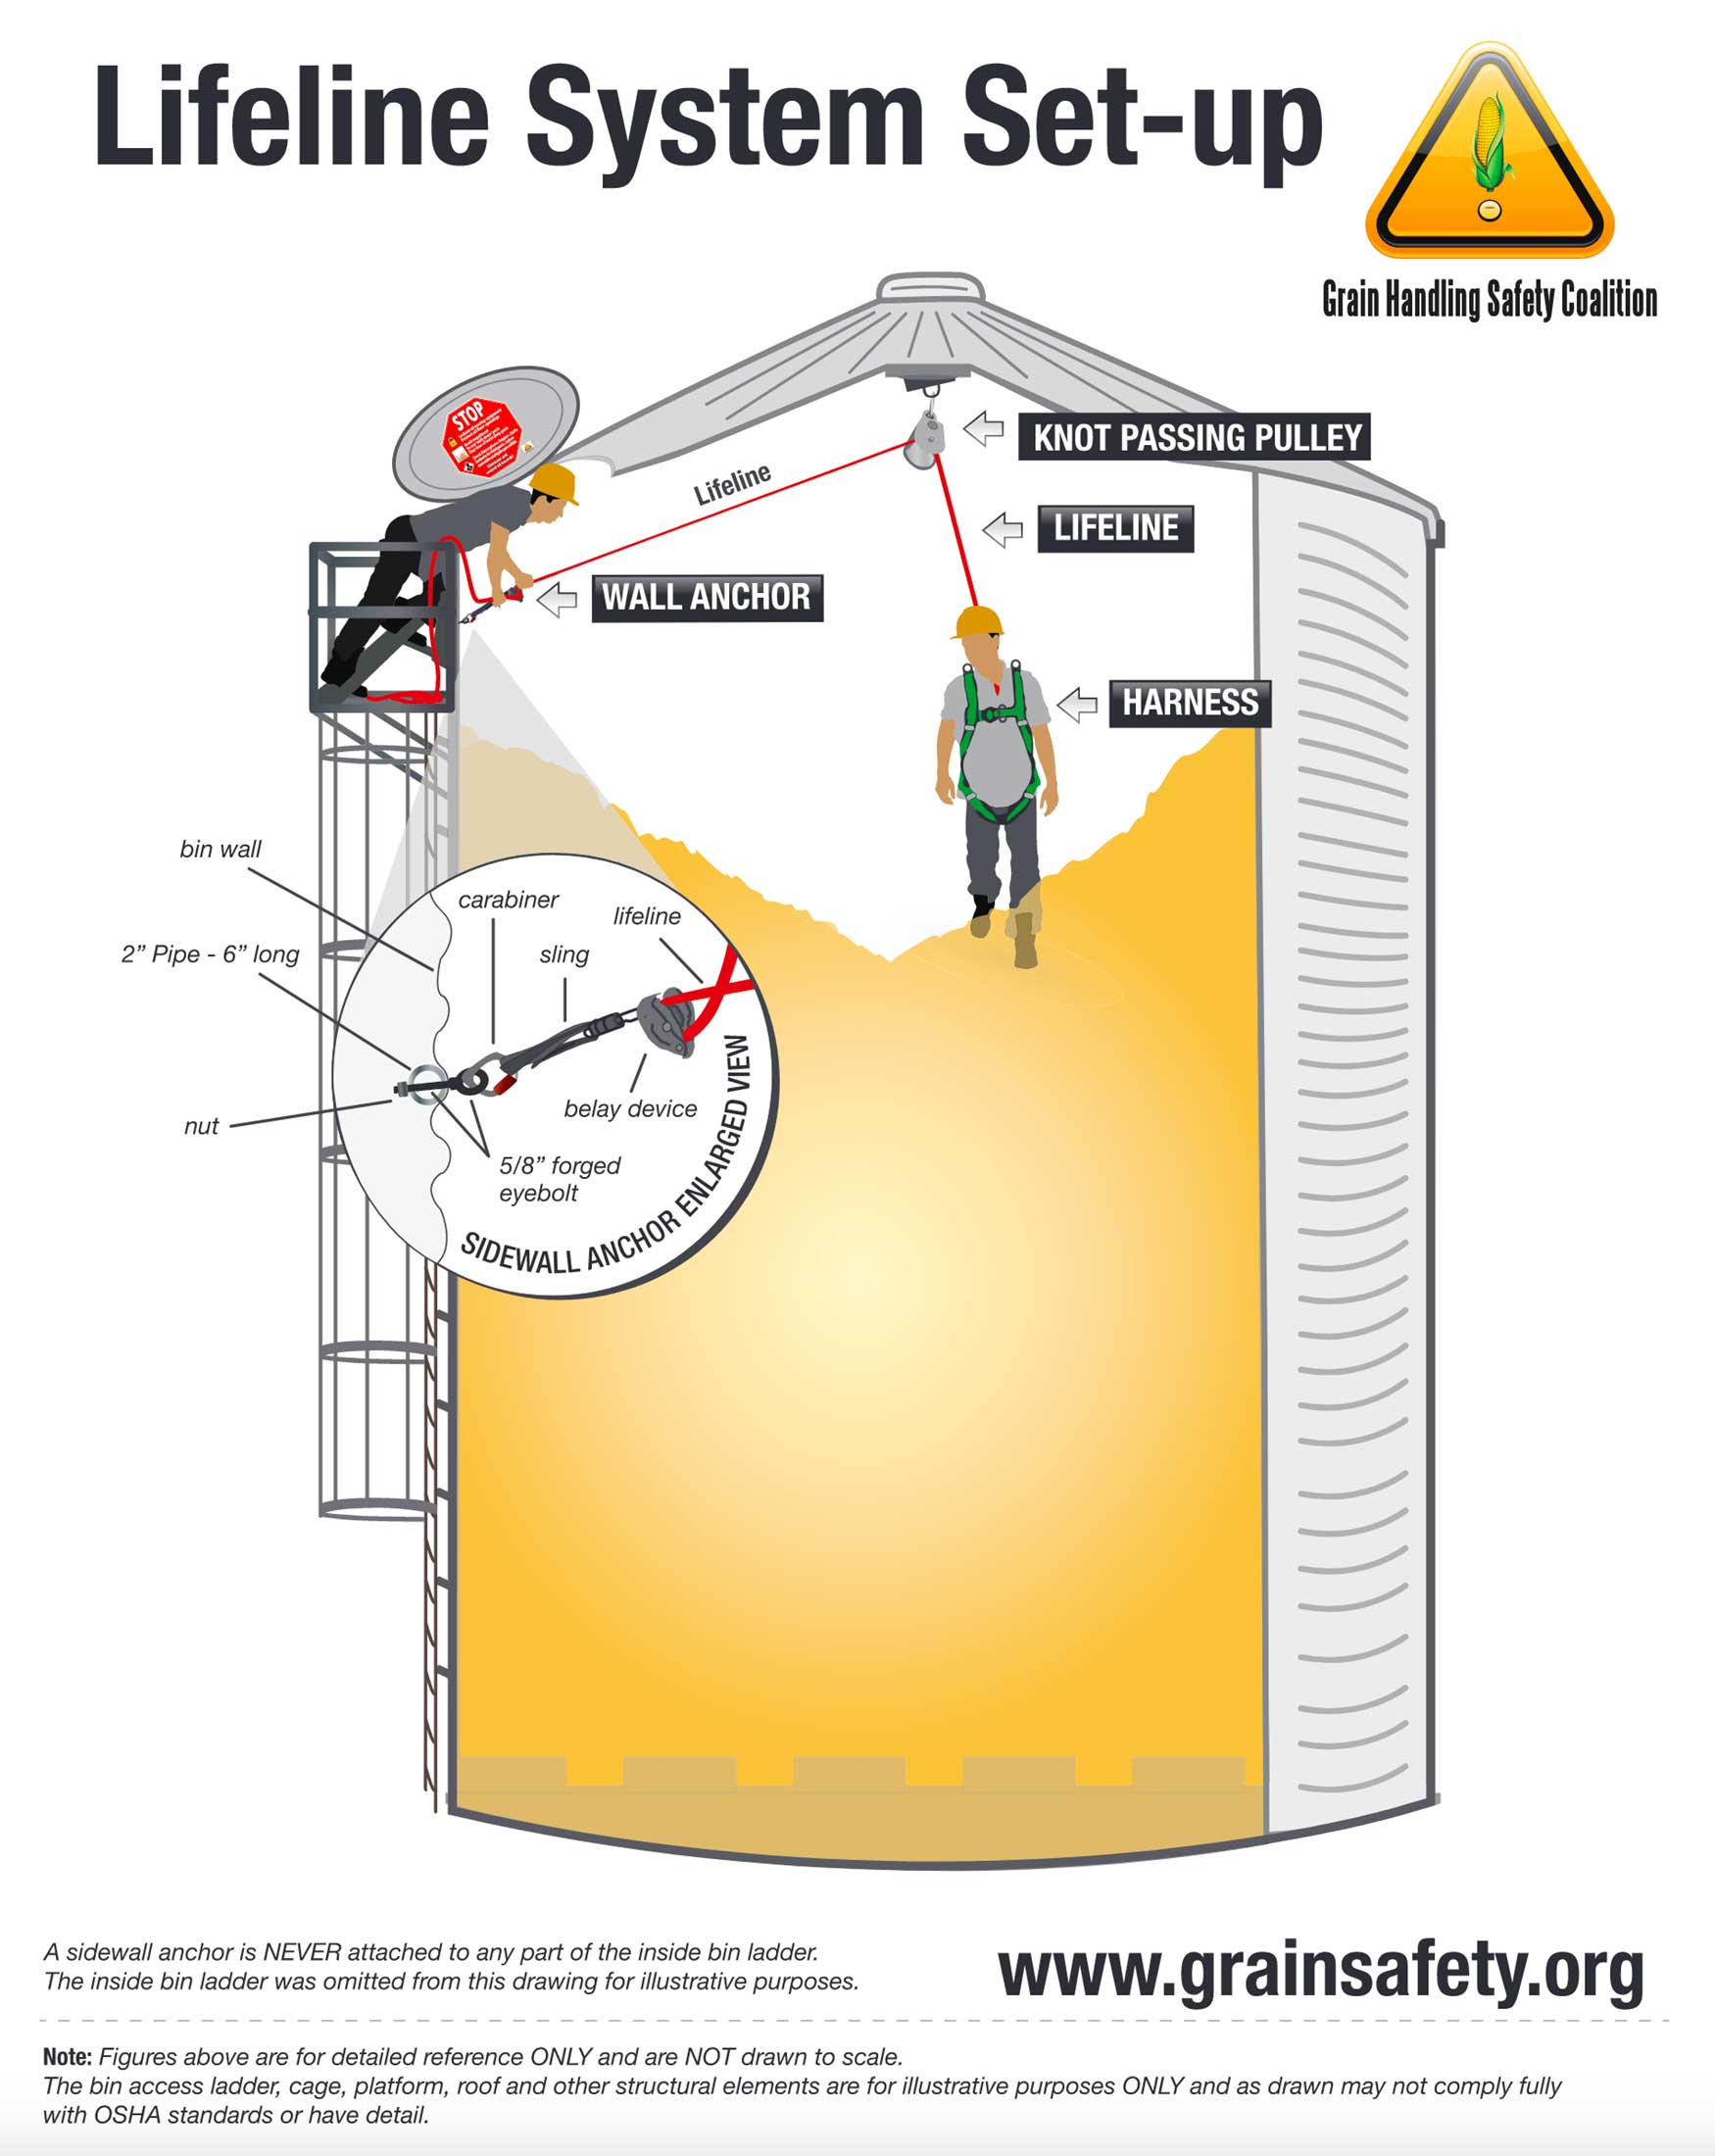 Diagram of lifeline system set-up. For a complete description, call the Grain Handling Safety Coalition at 217-787-2417